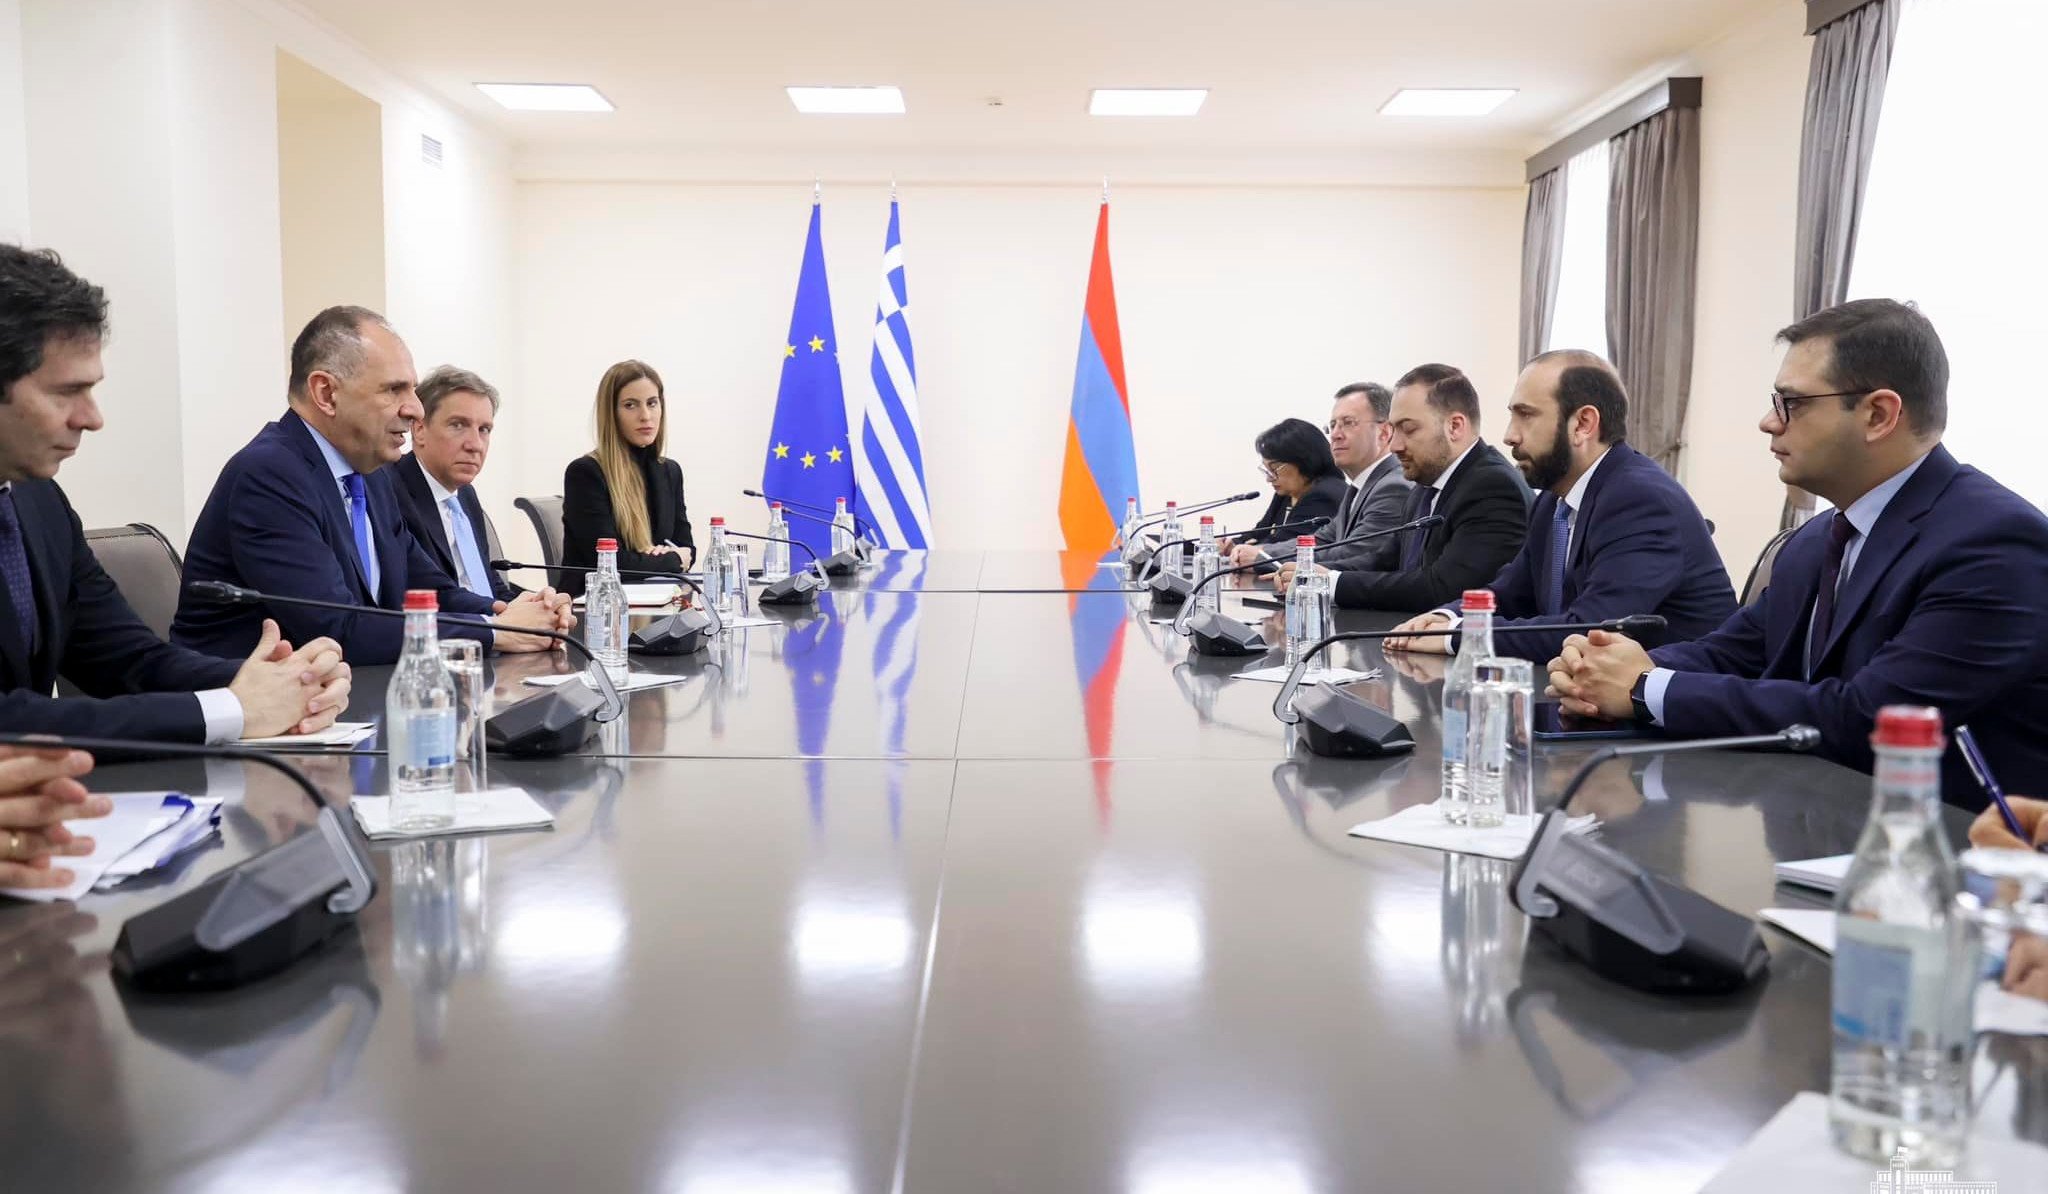 Enlarged meeting of Foreign Ministers of Armenia and Greece is underway